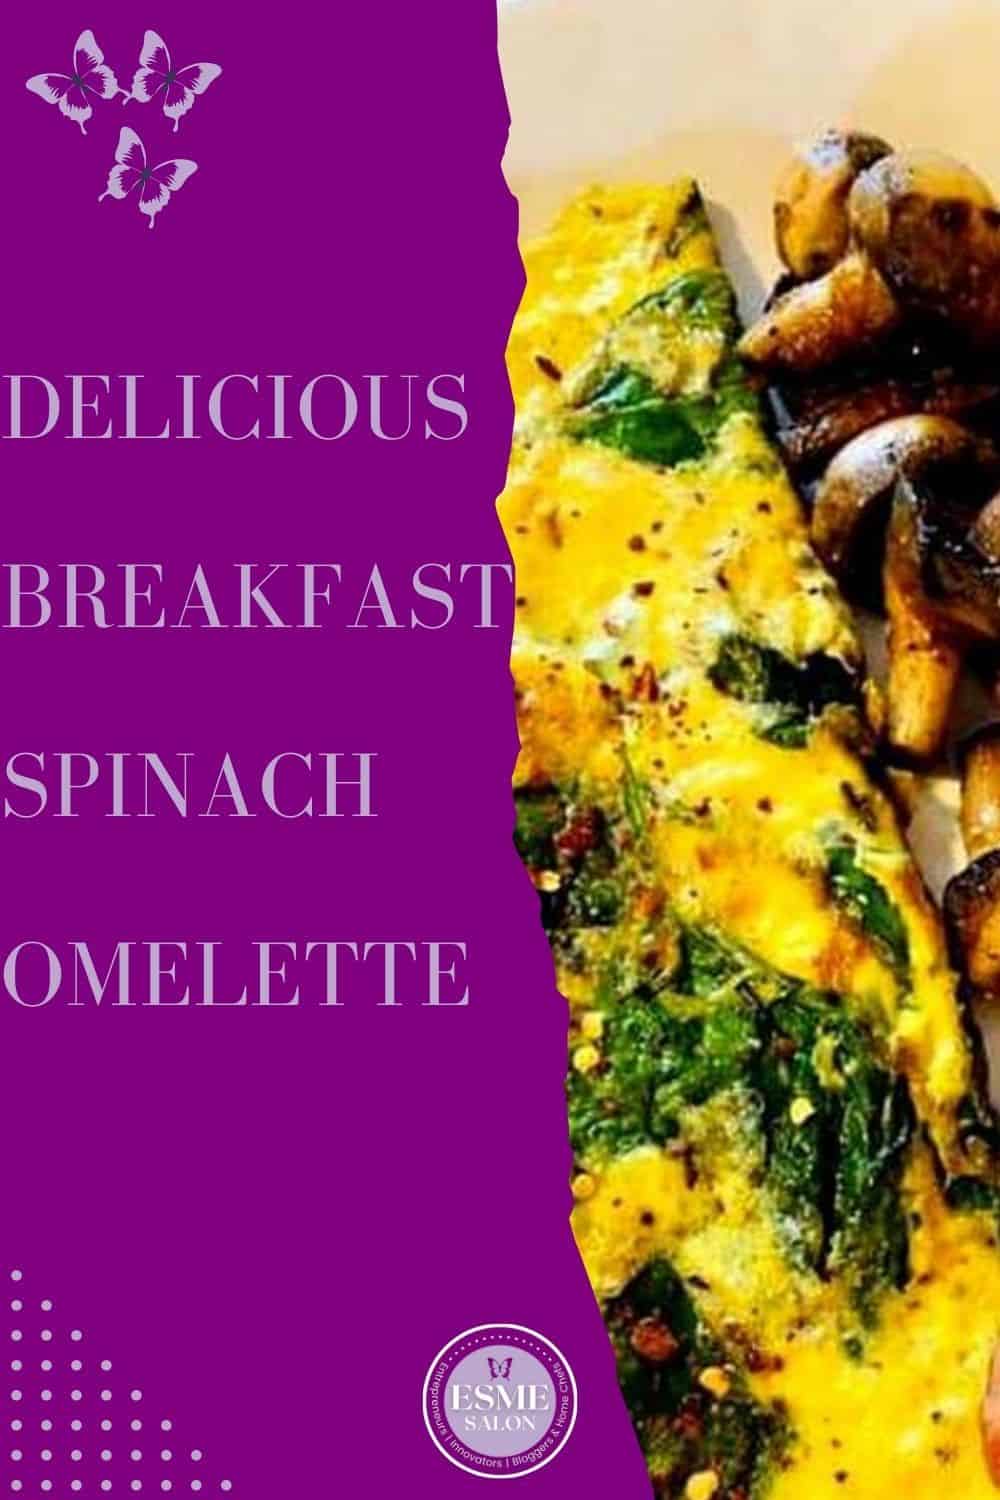 Spinach omelette with Spinach and mushrooms on the side